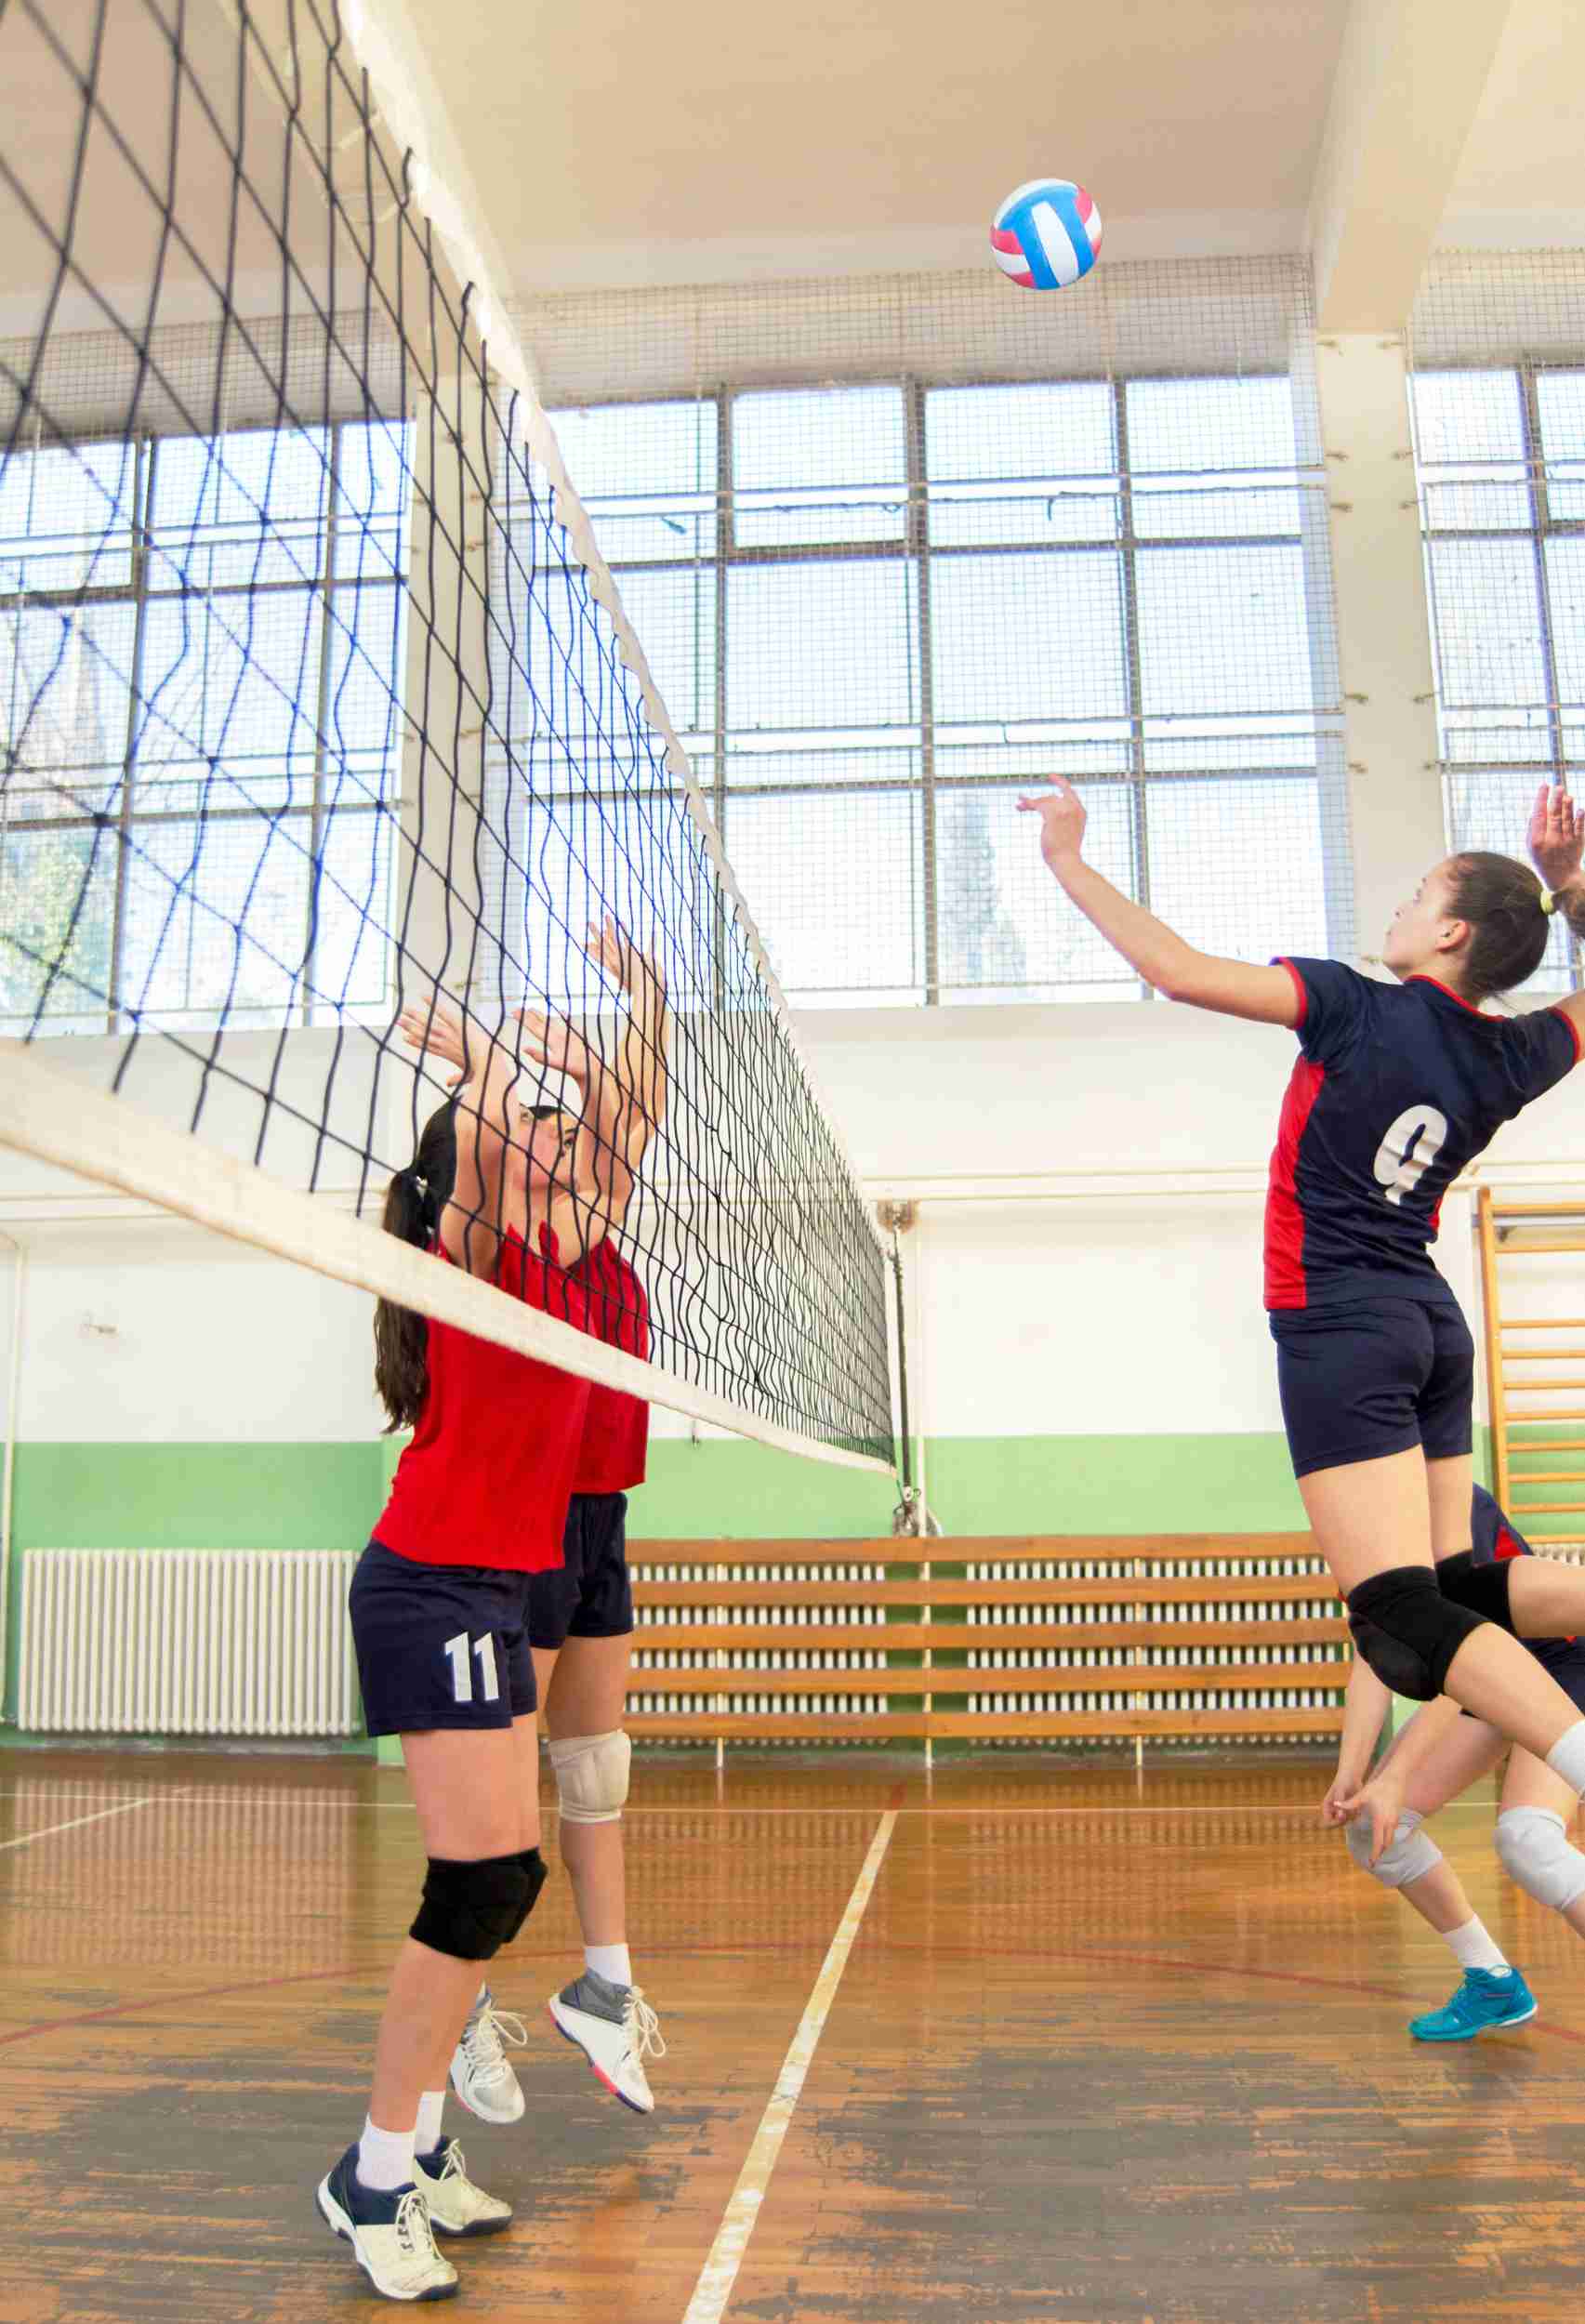 Striving for Excellence: How Volleyball Can Foster Personal Growth (4 Tips)